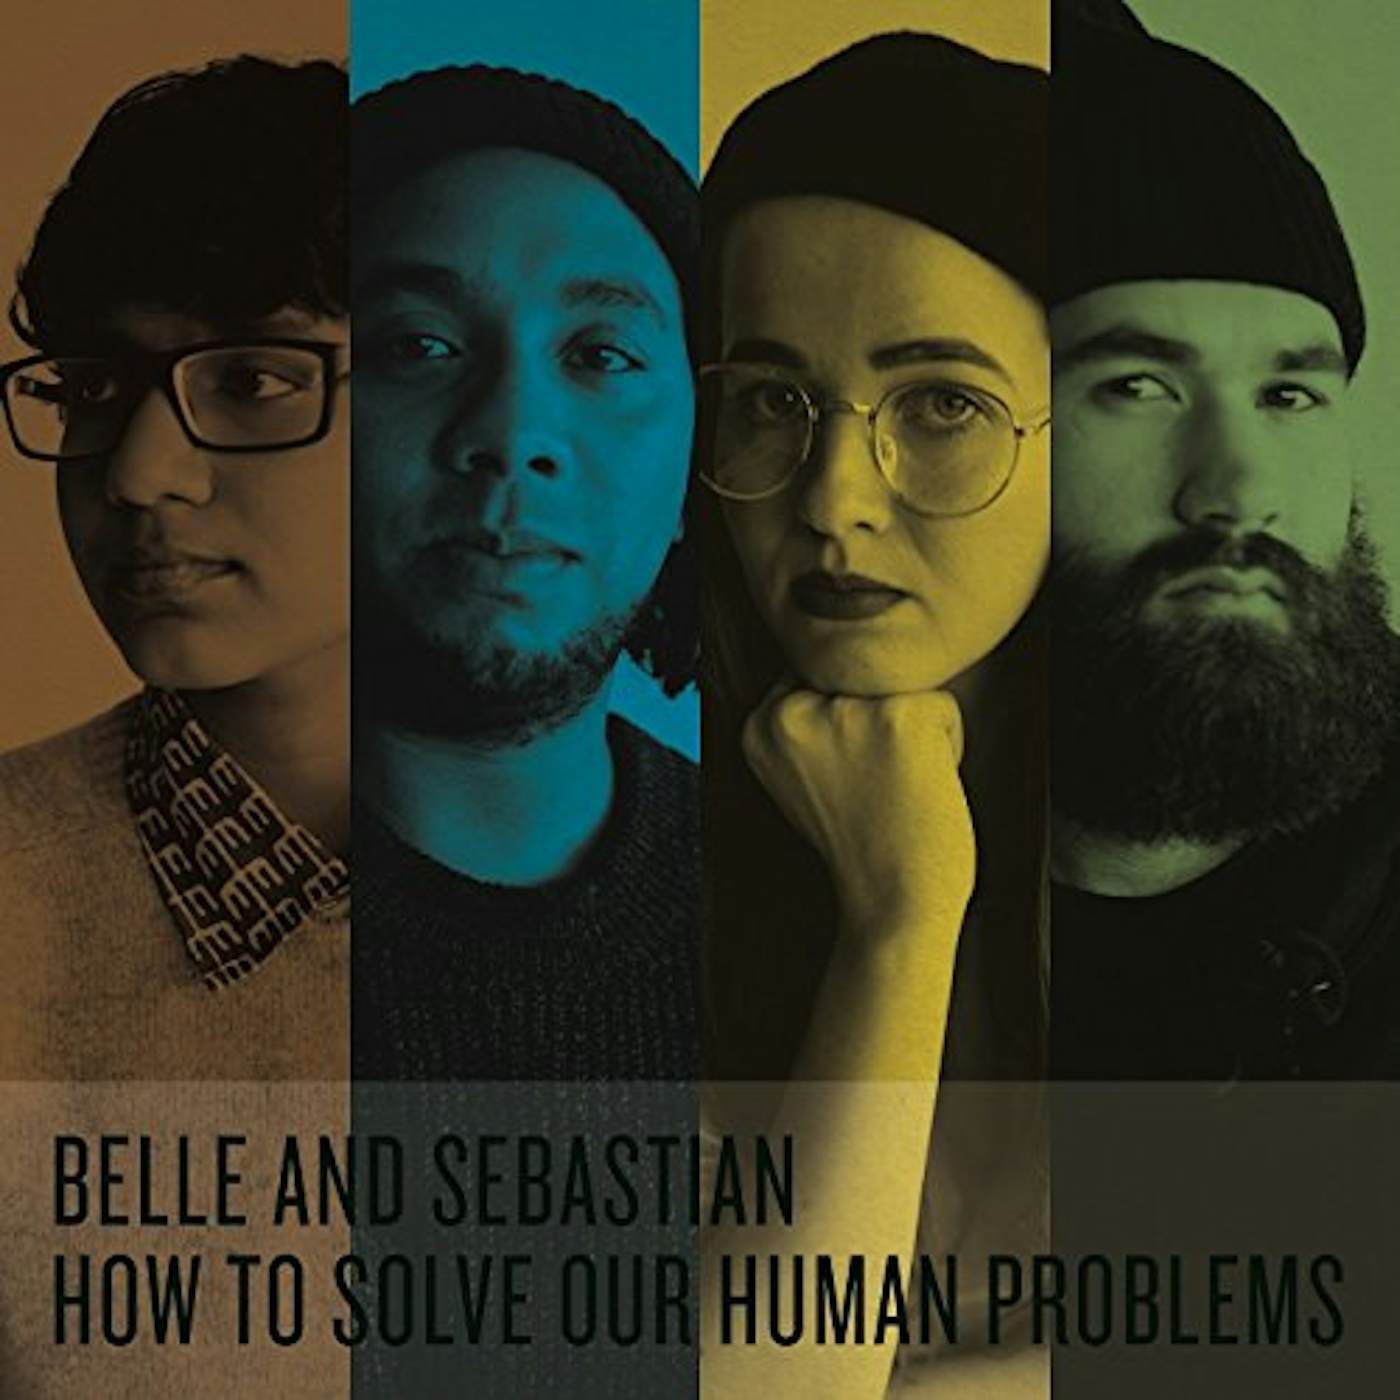 Belle and Sebastian HOW TO SOLVE OUR HUMAN PROBLEMS CD